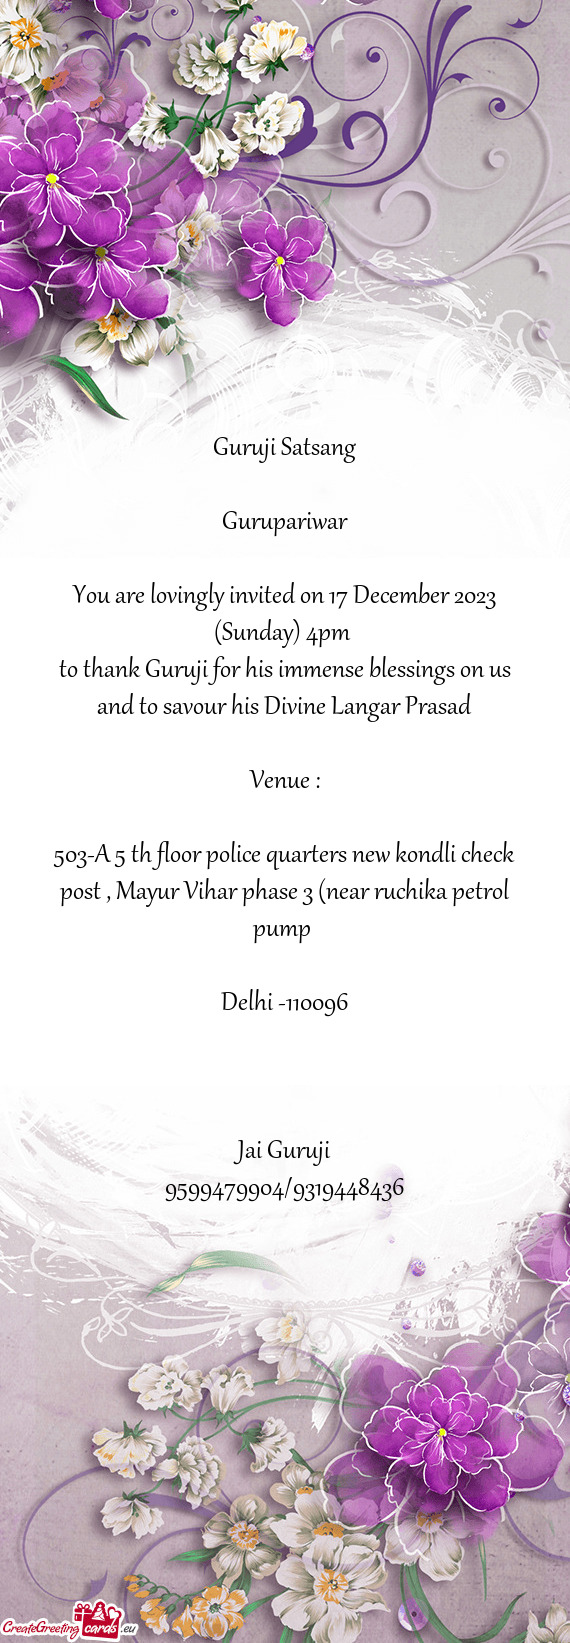 You are lovingly invited on 17 December 2023 (Sunday) 4pm